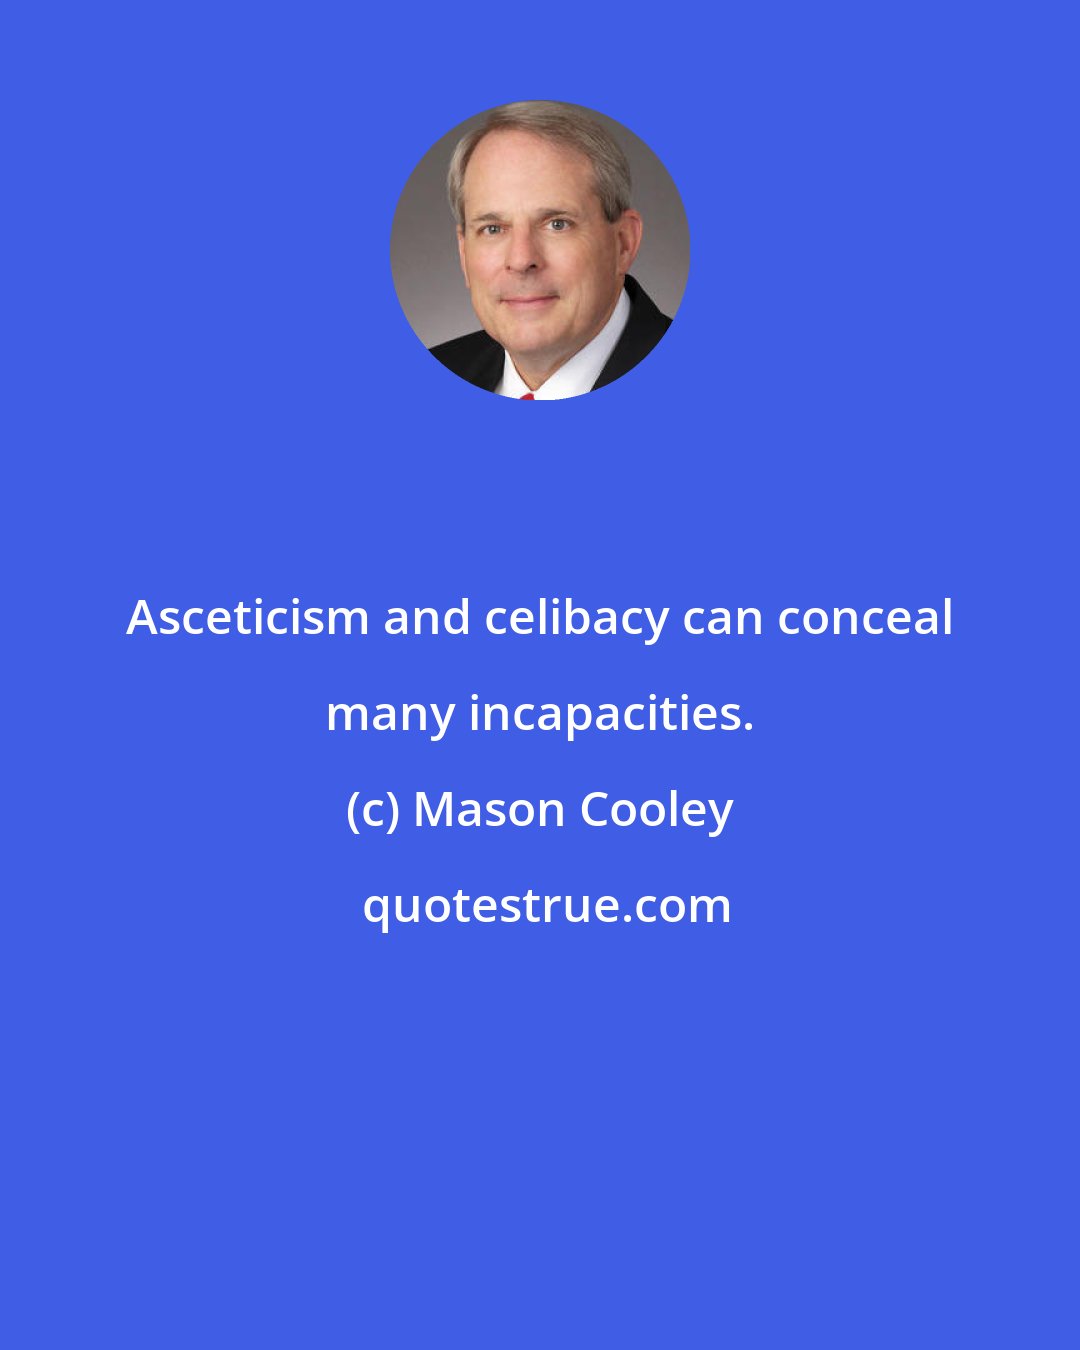 Mason Cooley: Asceticism and celibacy can conceal many incapacities.